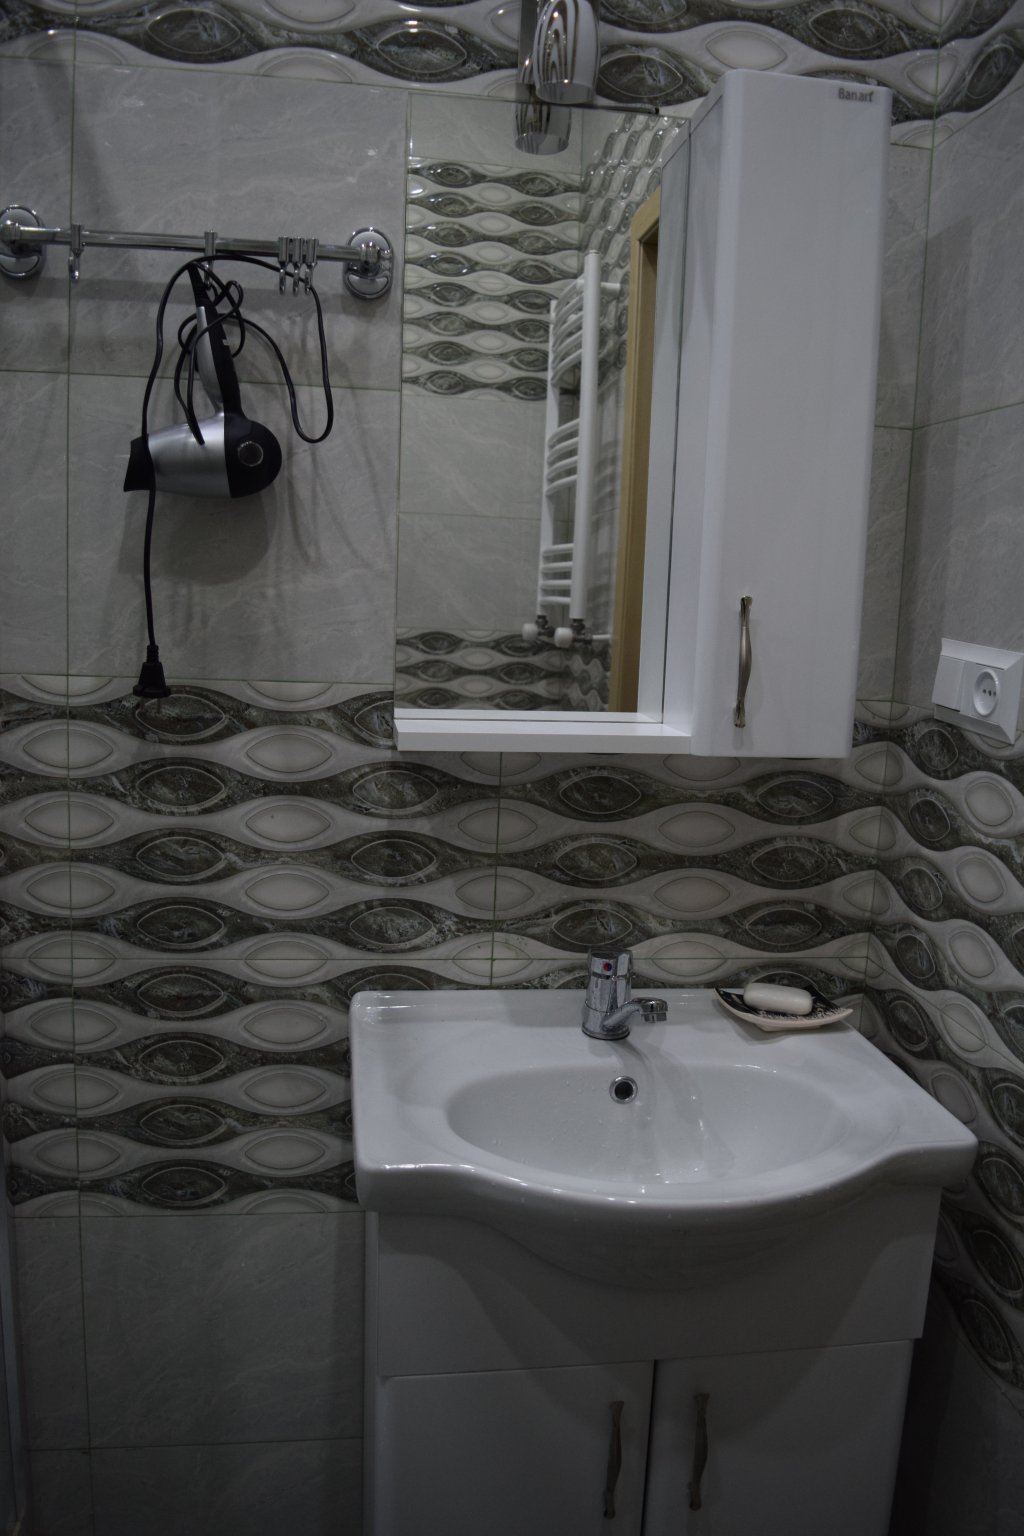 Two bedroom apartment for a comfortable stay id-484 - Batumi Vacation Rentals